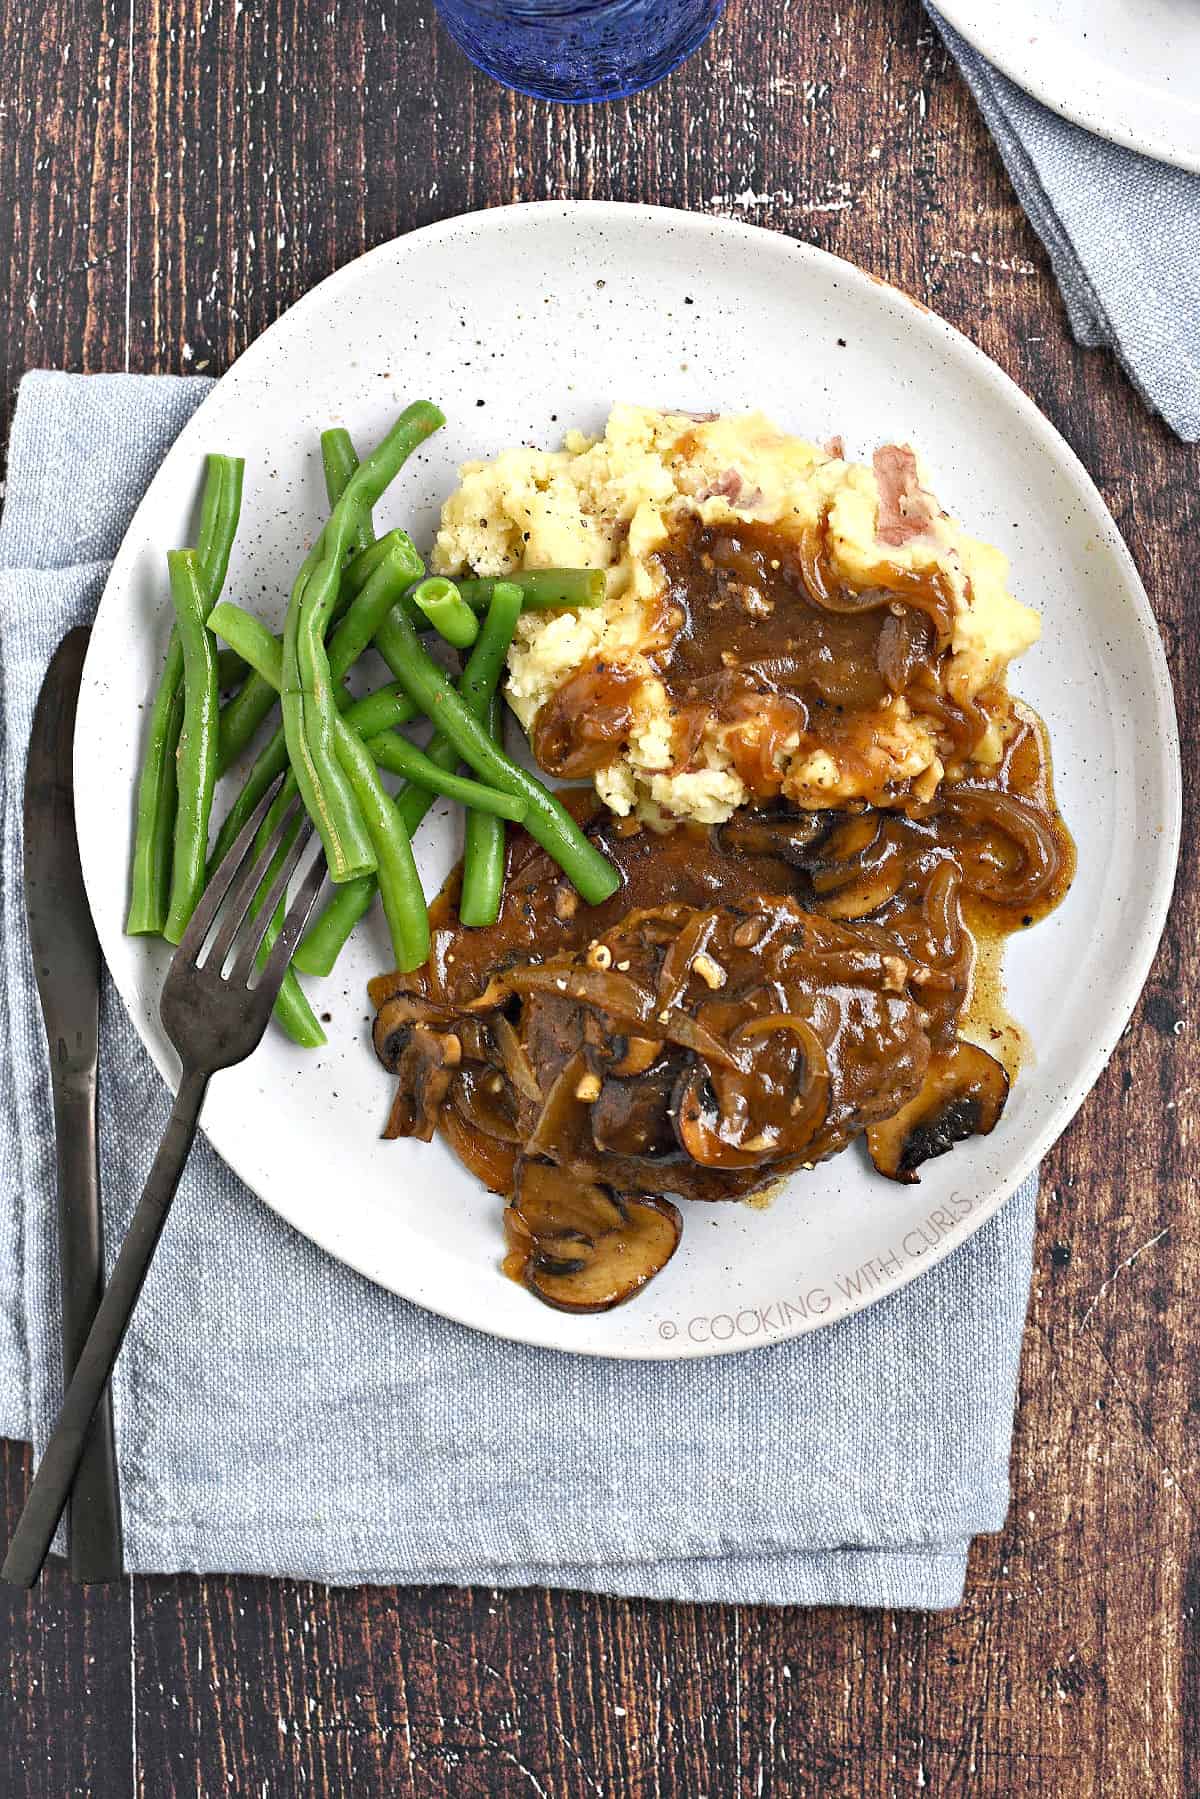 Looking down on a plate of mushroom gravy topped salisbury steak and mashed potatoes with green beans on the side.